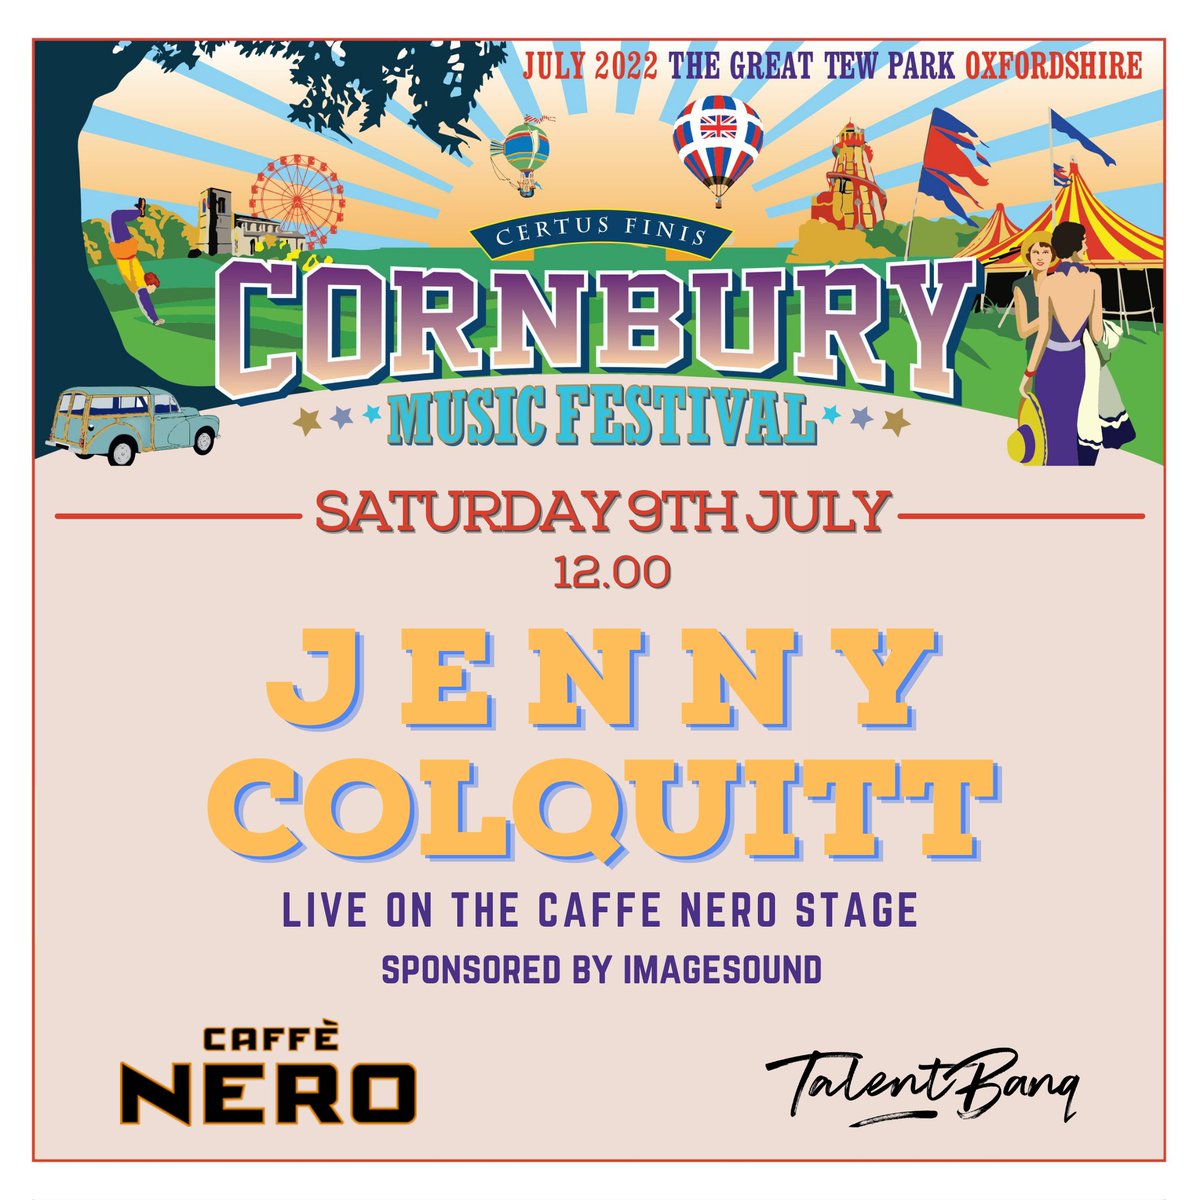 Sat July 9th at Noon
@JennyColquitt live on the #CaffeNero stage at @Cornbury 
FATEA 'Female Artist of the Year' 2021/2022 and GSMC Best Female Solo Singer/Songwriter 2020/2021. Jenny’s Folk/Rock sound is influenced by female powerhouses, such as Sandy Denny and Alanis Morissette https://t.co/VsqpW5PS3F